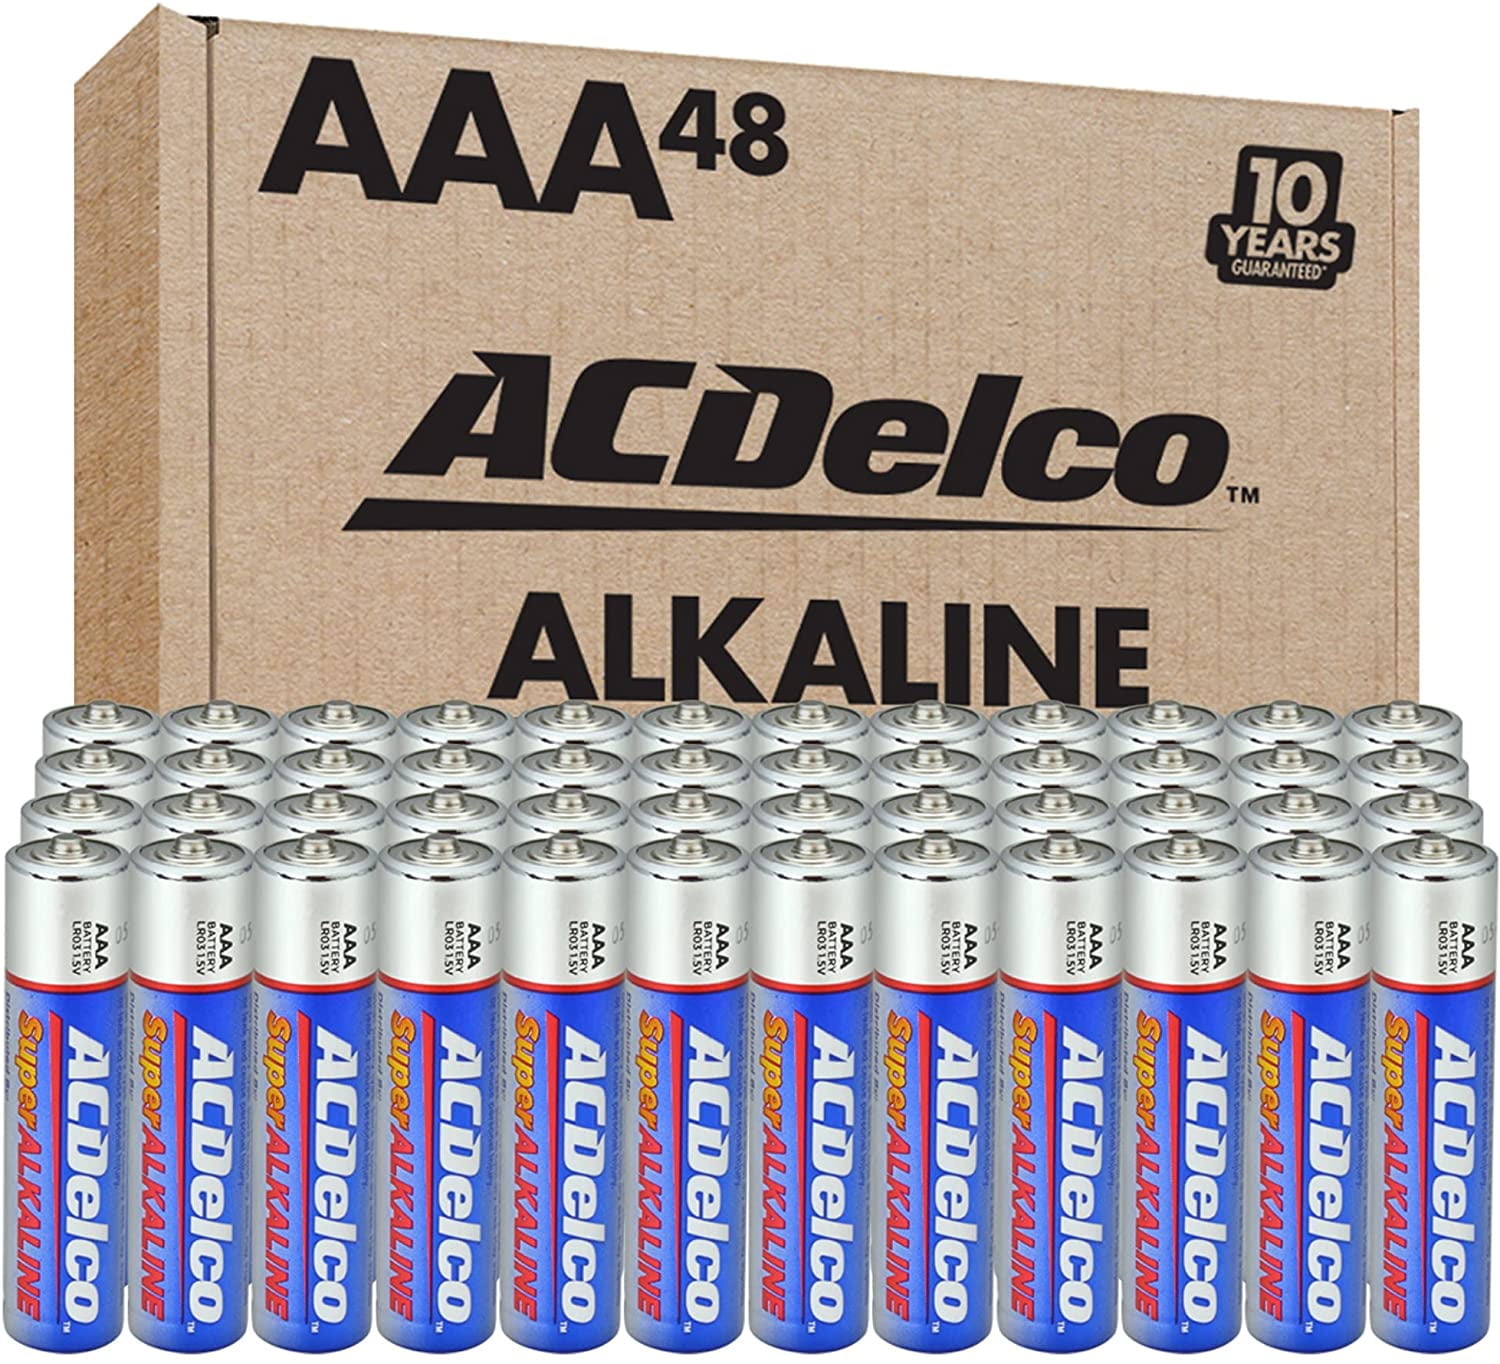 Basics 24 Count AA & AAA High-Performance Alkaline Batteries Value  Pack - 12 Double AA Batteries and 12 Triple AAA Batteries